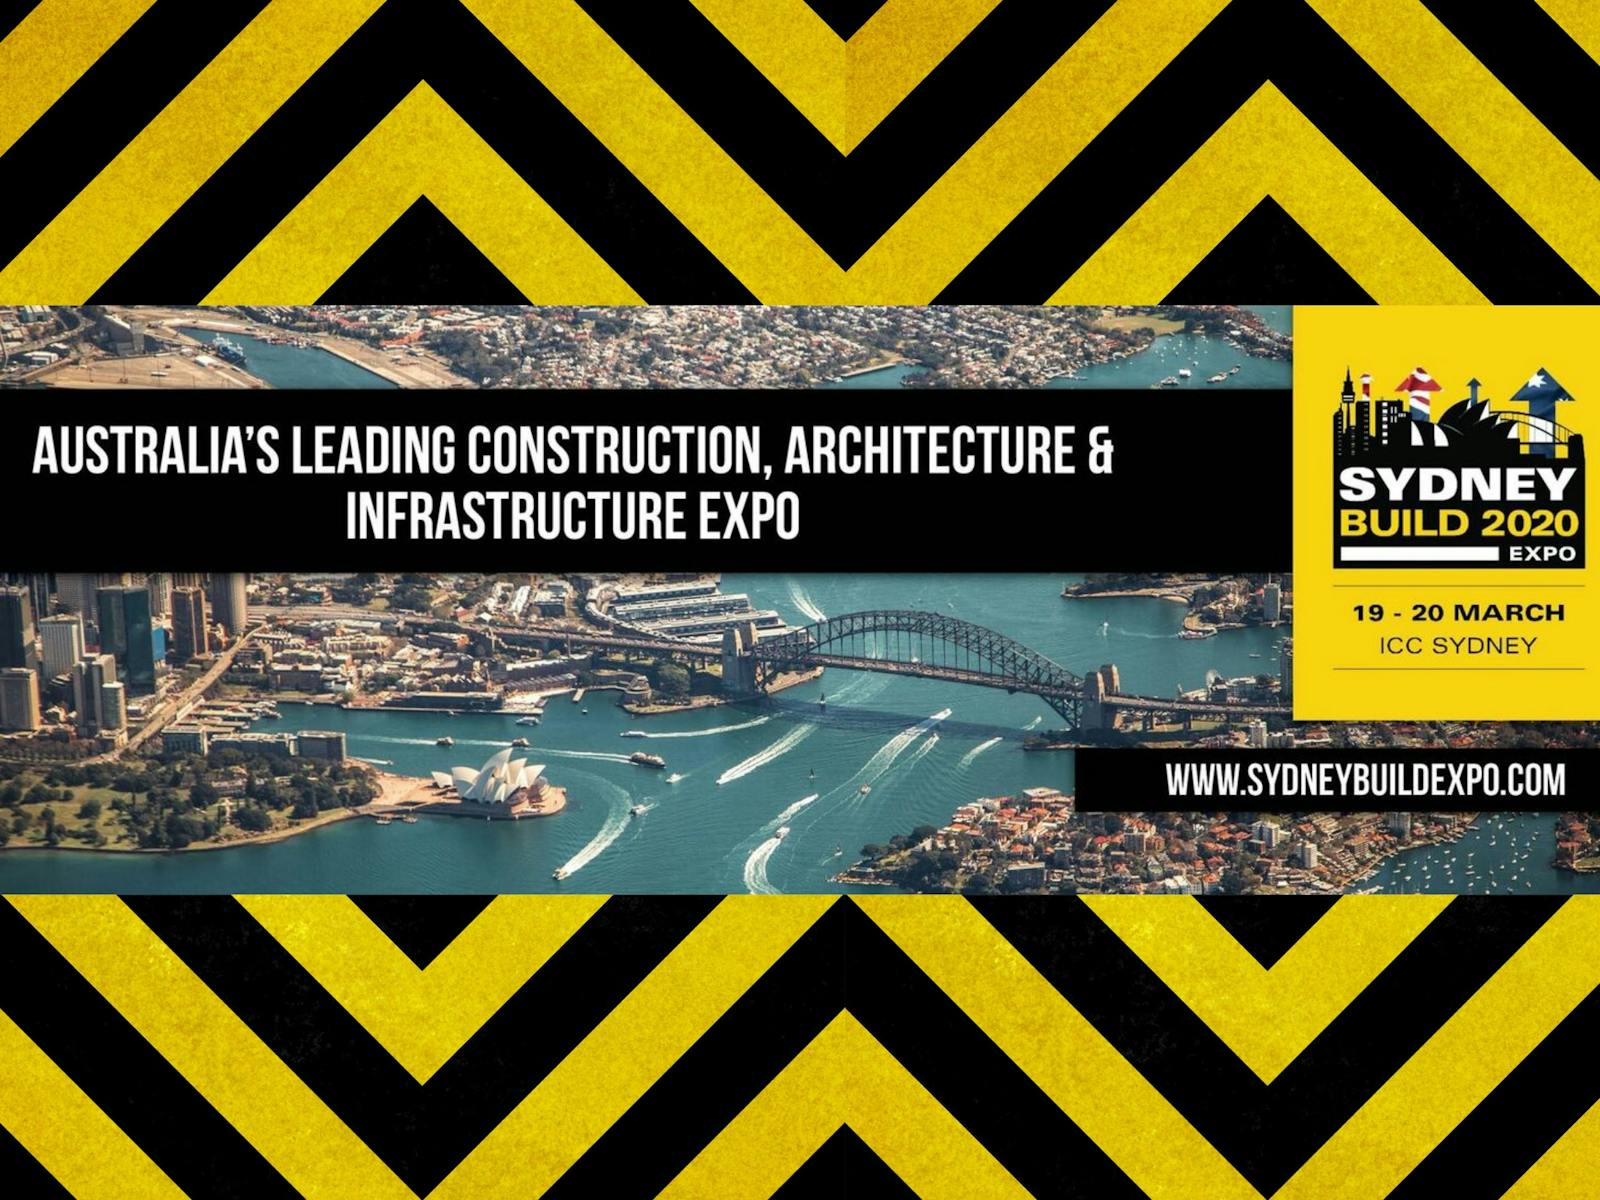 Image for Sydney Build Expo